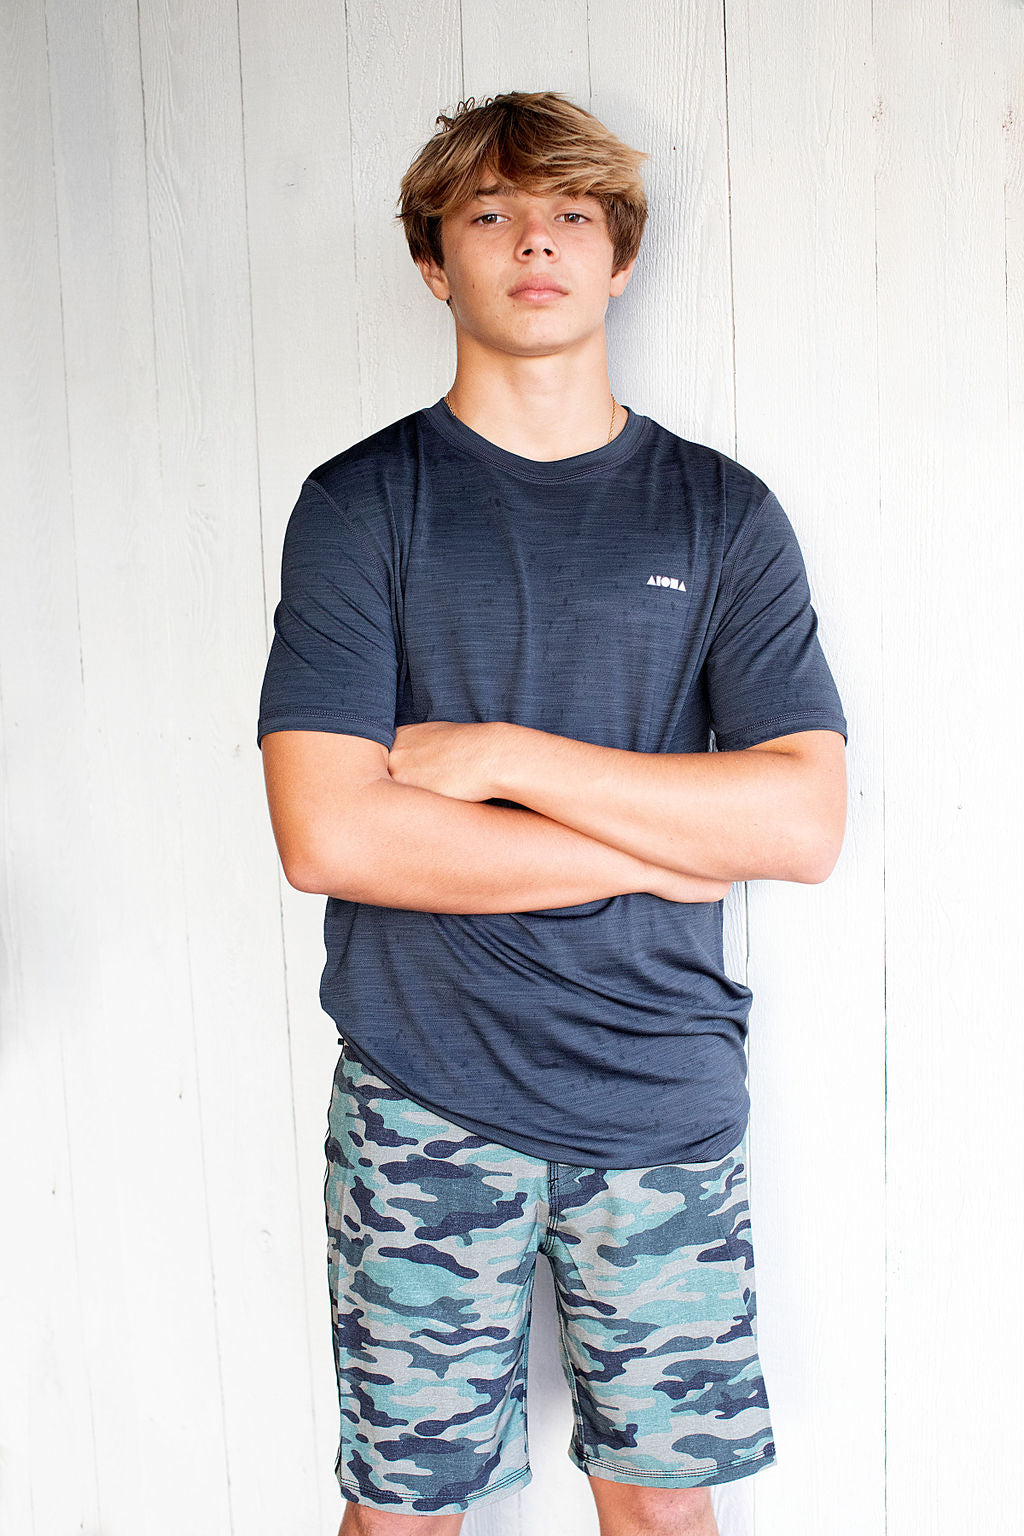 Young man wearing camo print unisex youth boardshorts with arms crossed